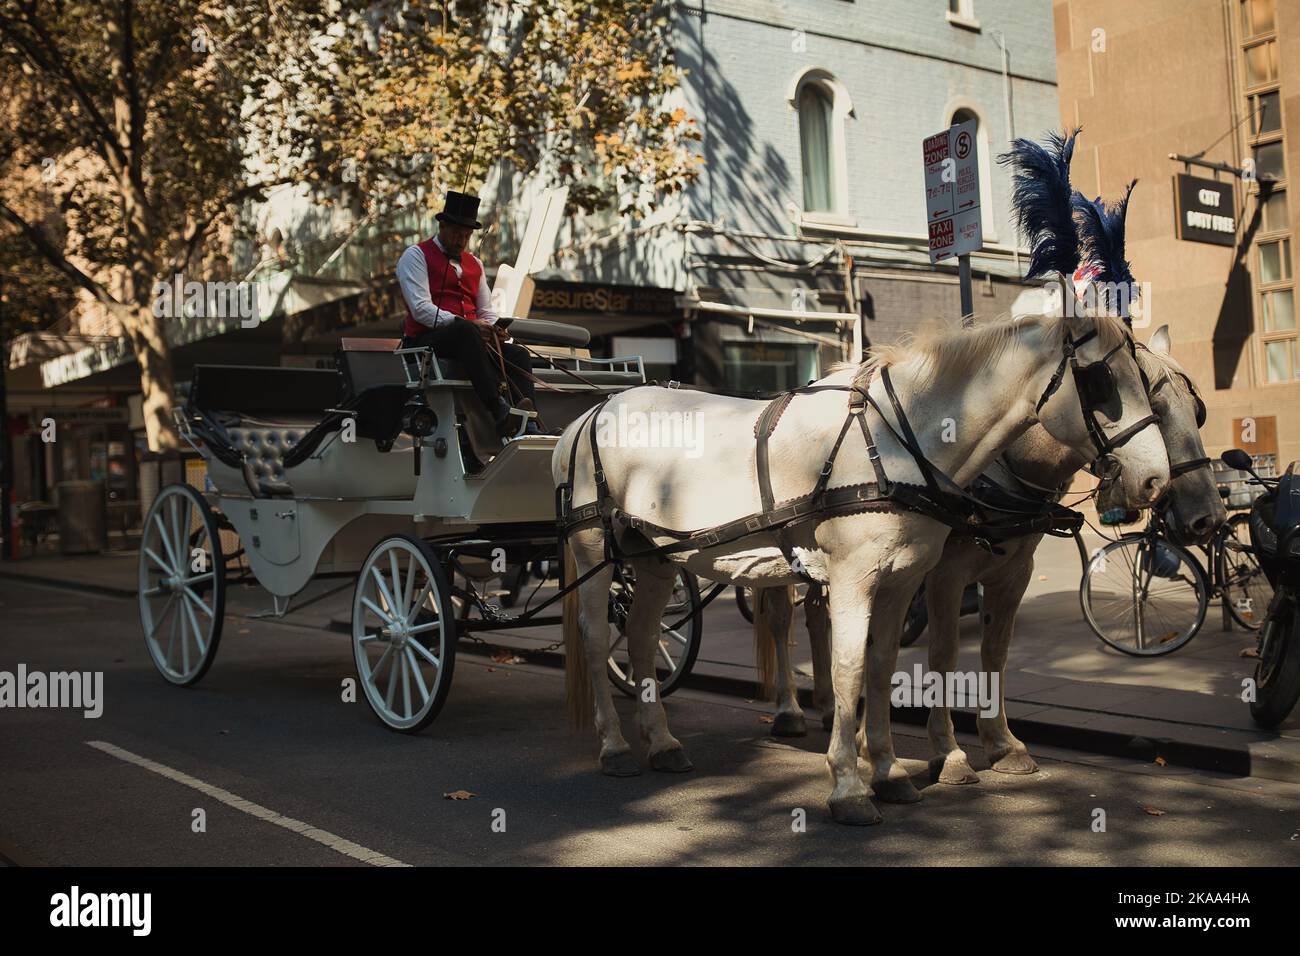 A selective of white horses pulling a carriage on the city streets Stock Photo